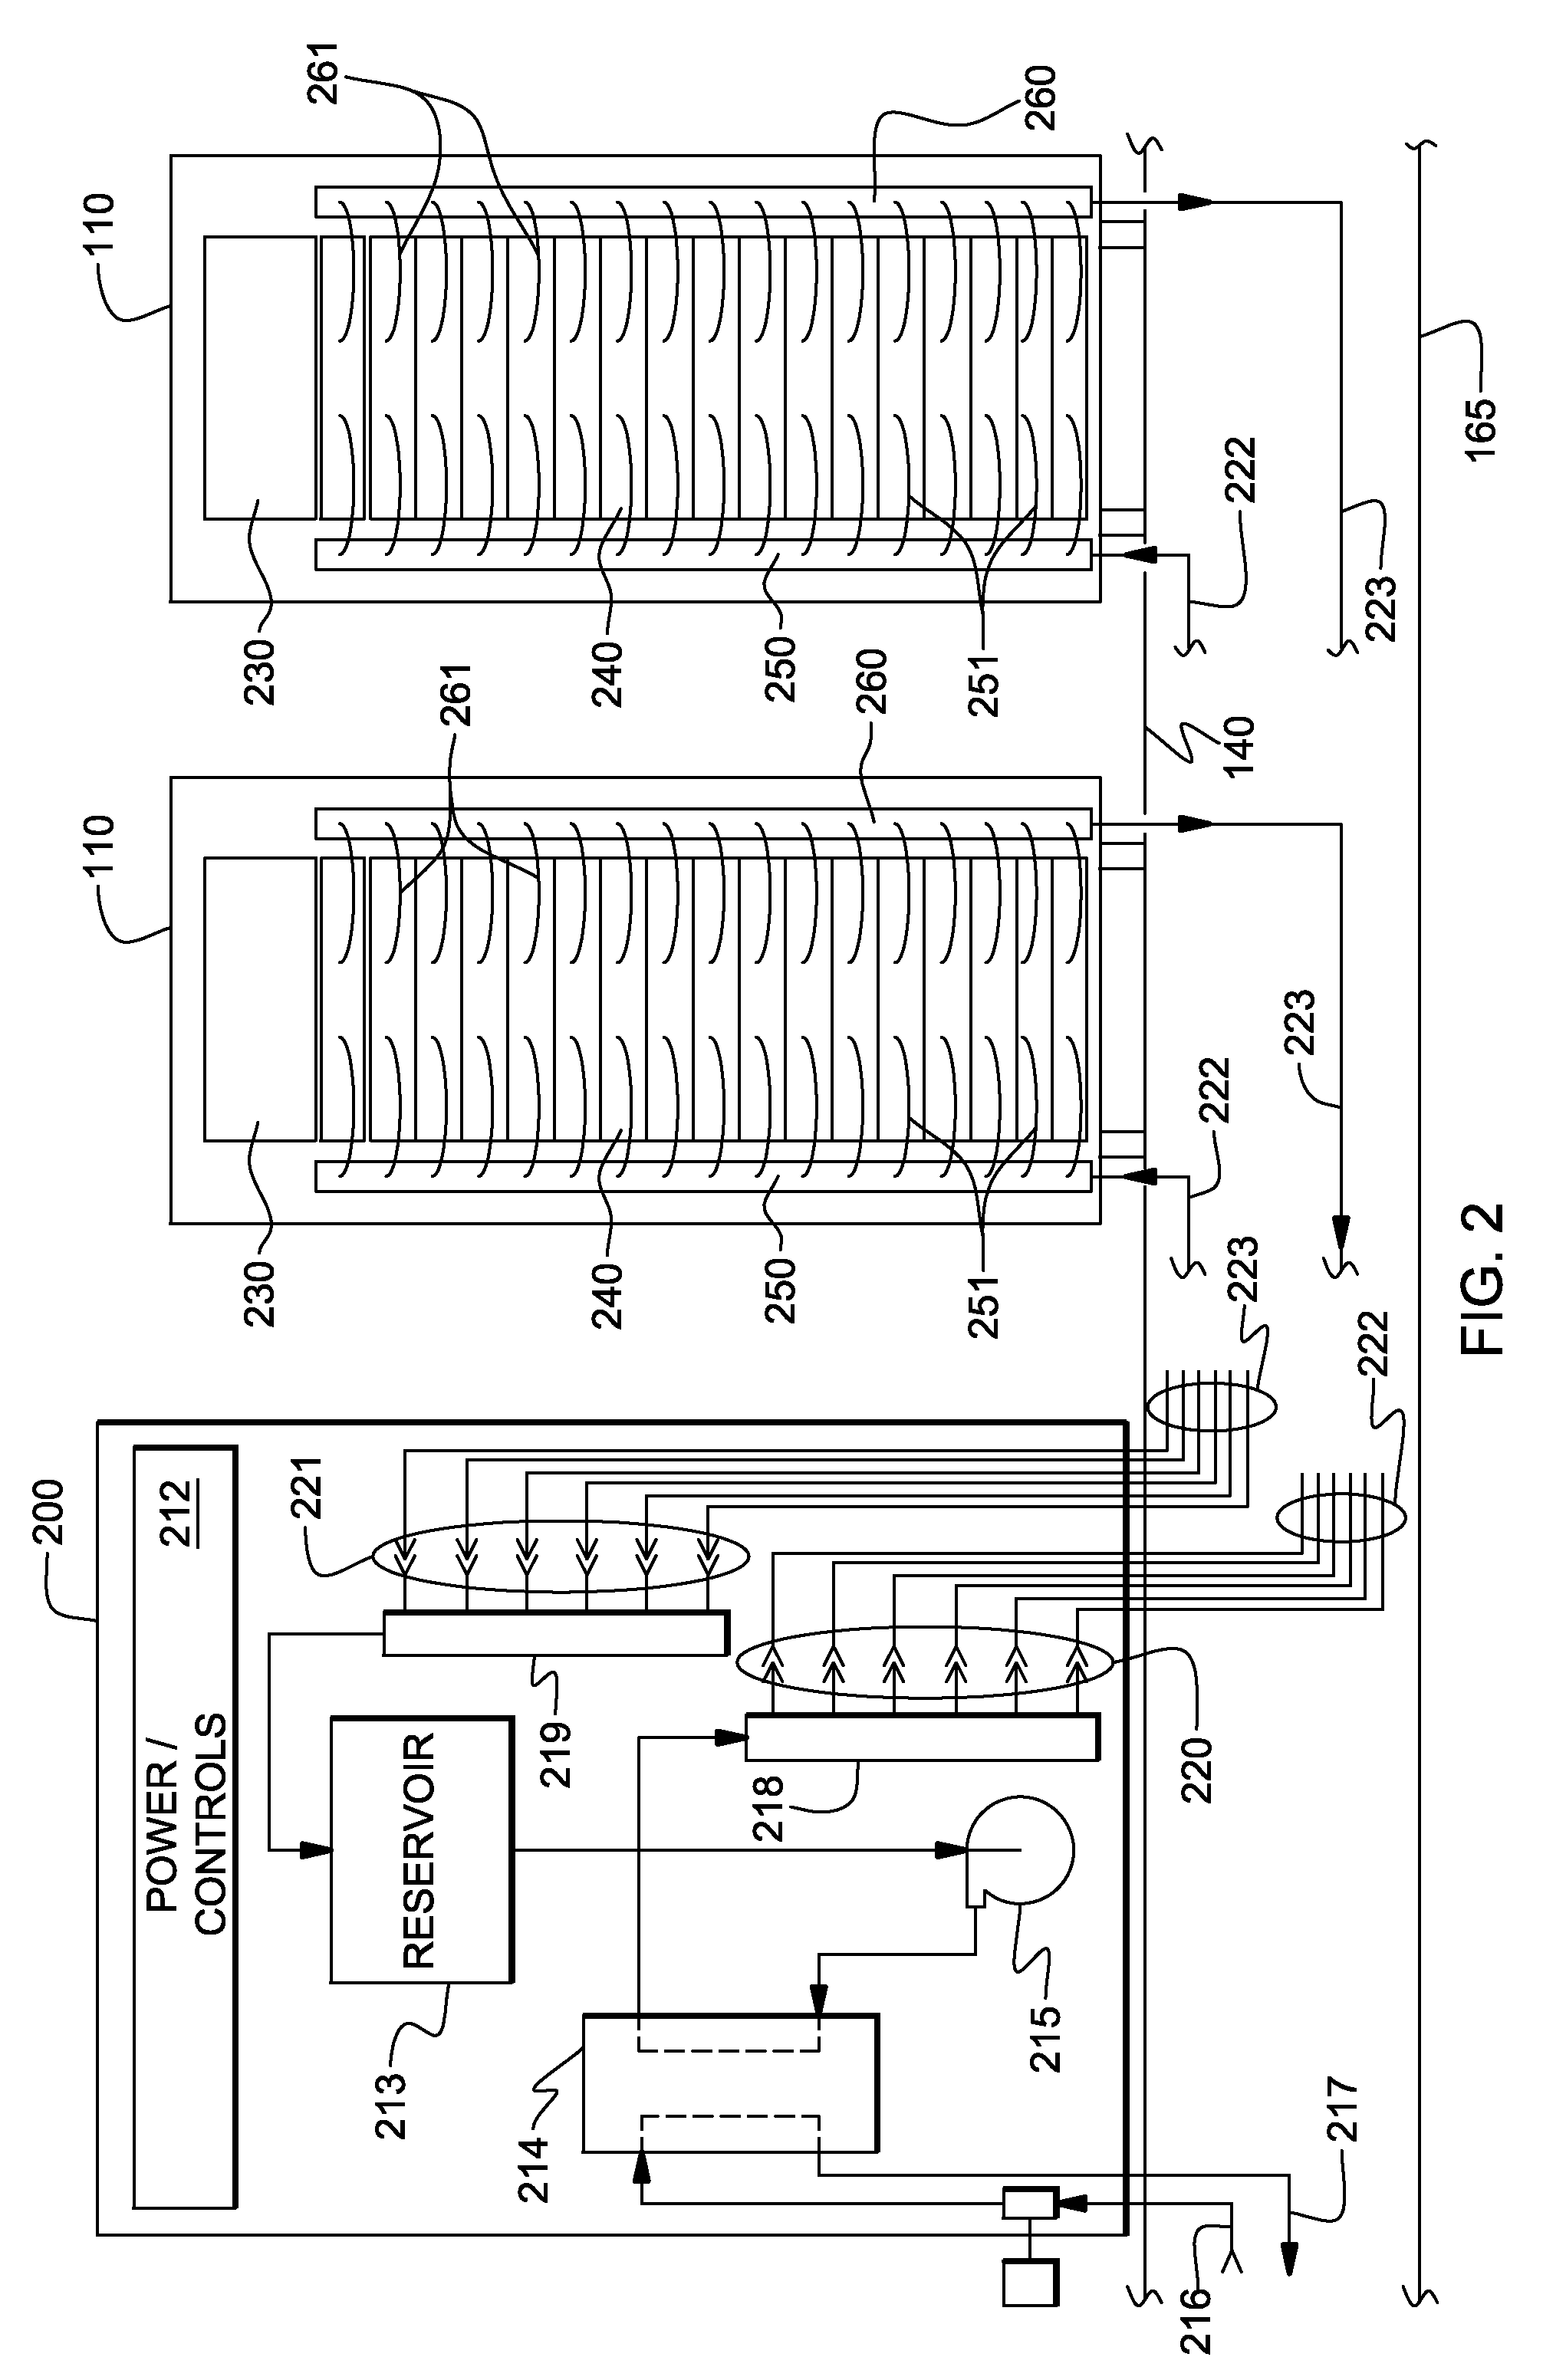 Cooled electronic module with pump-enhanced, dielectric fluid immersion-cooling